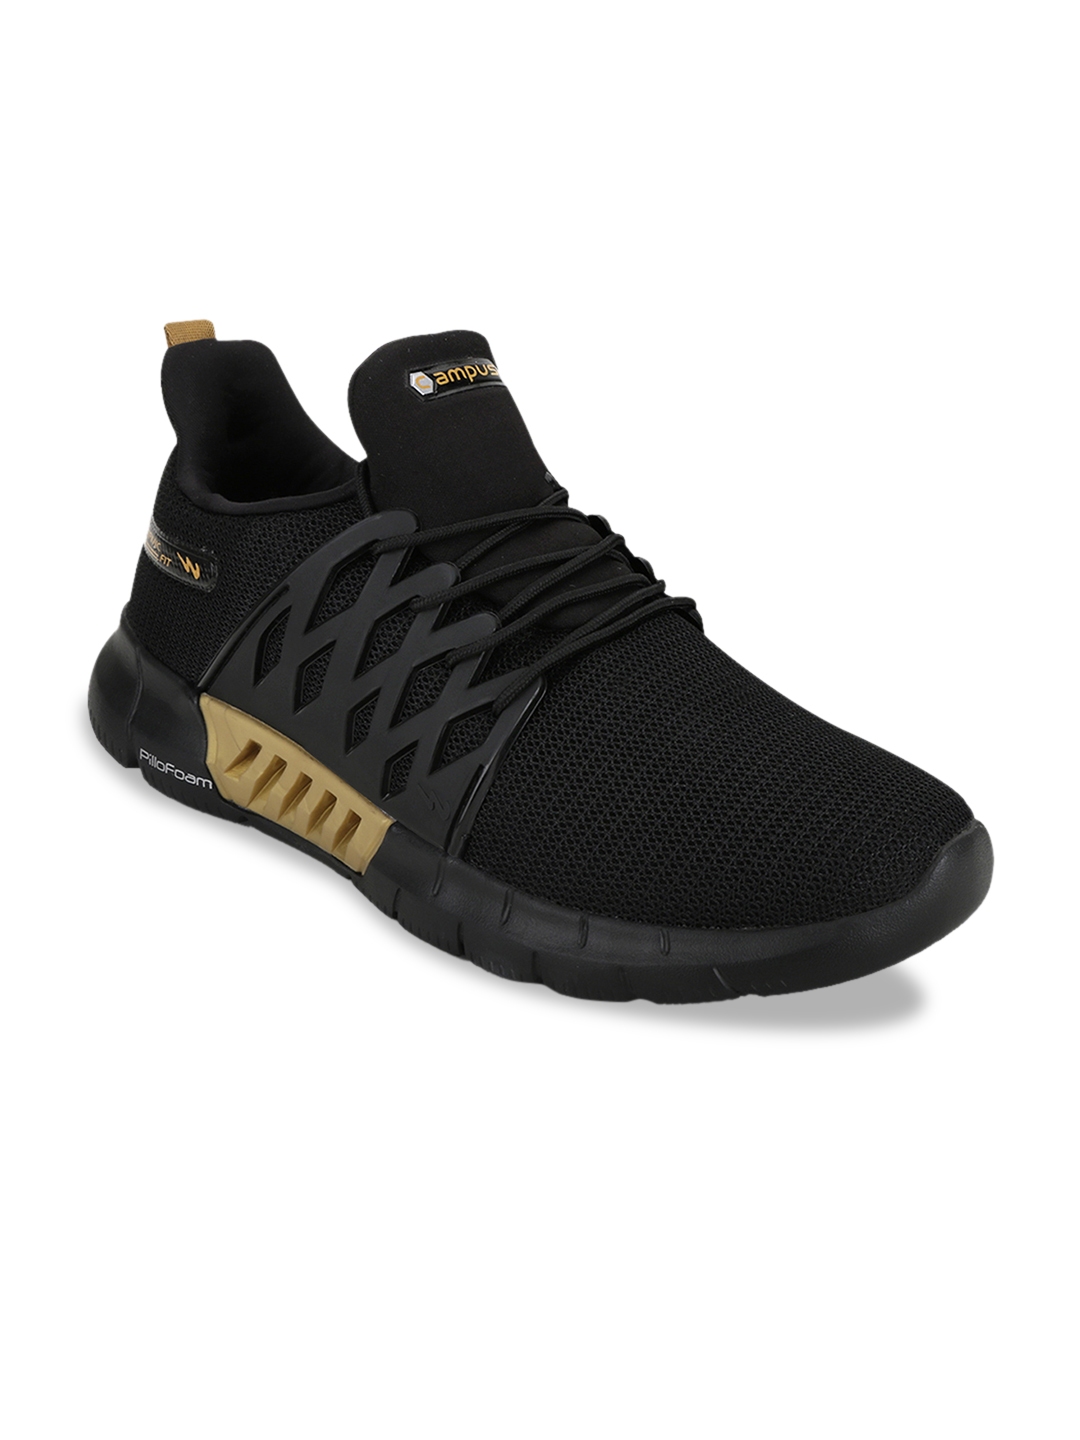 Buy Campus Men Black Running Shoes - Sports Shoes for Men 10927662 | Myntra